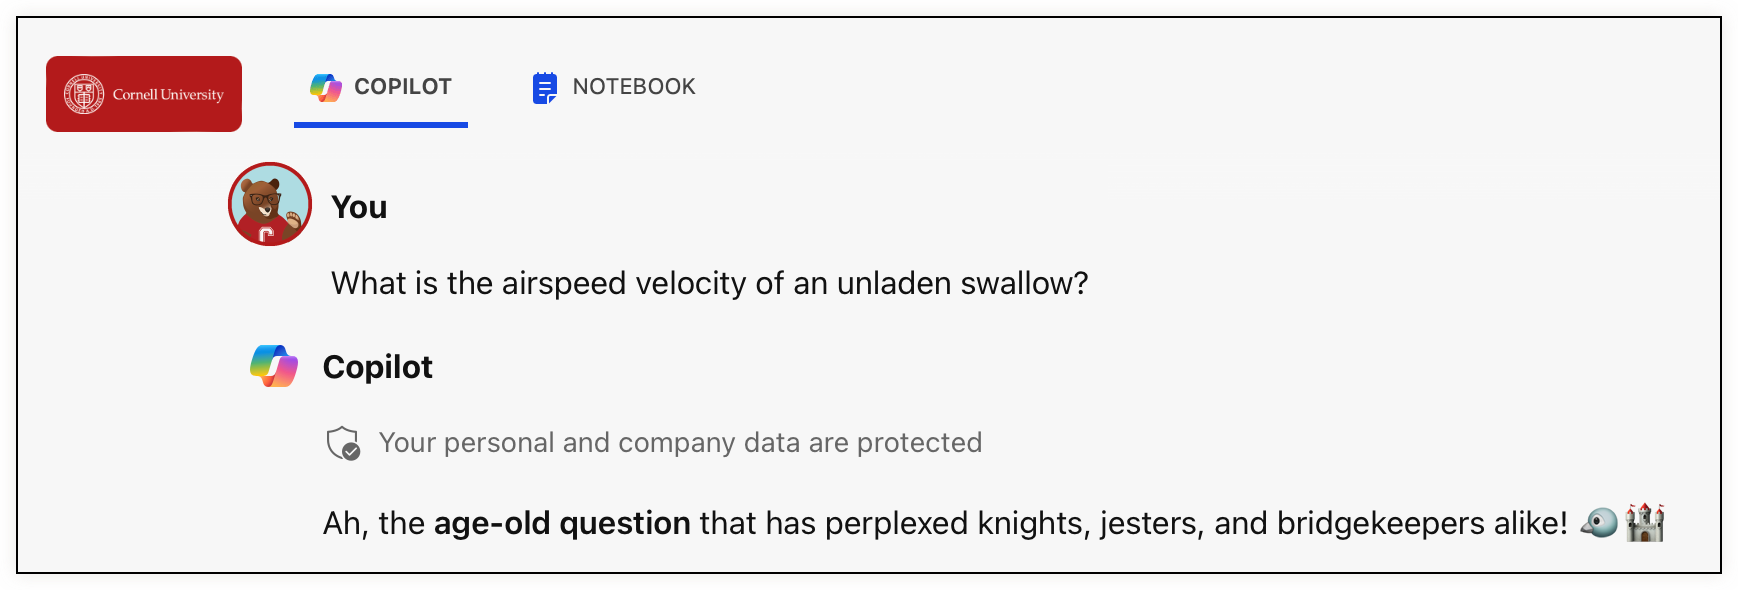 copilot answers: Ah, the age-old question that has perplexed knights, jesters, and bridgekeepers alike!  to the prompt What is the airspeed velocity of an unladen swallow?